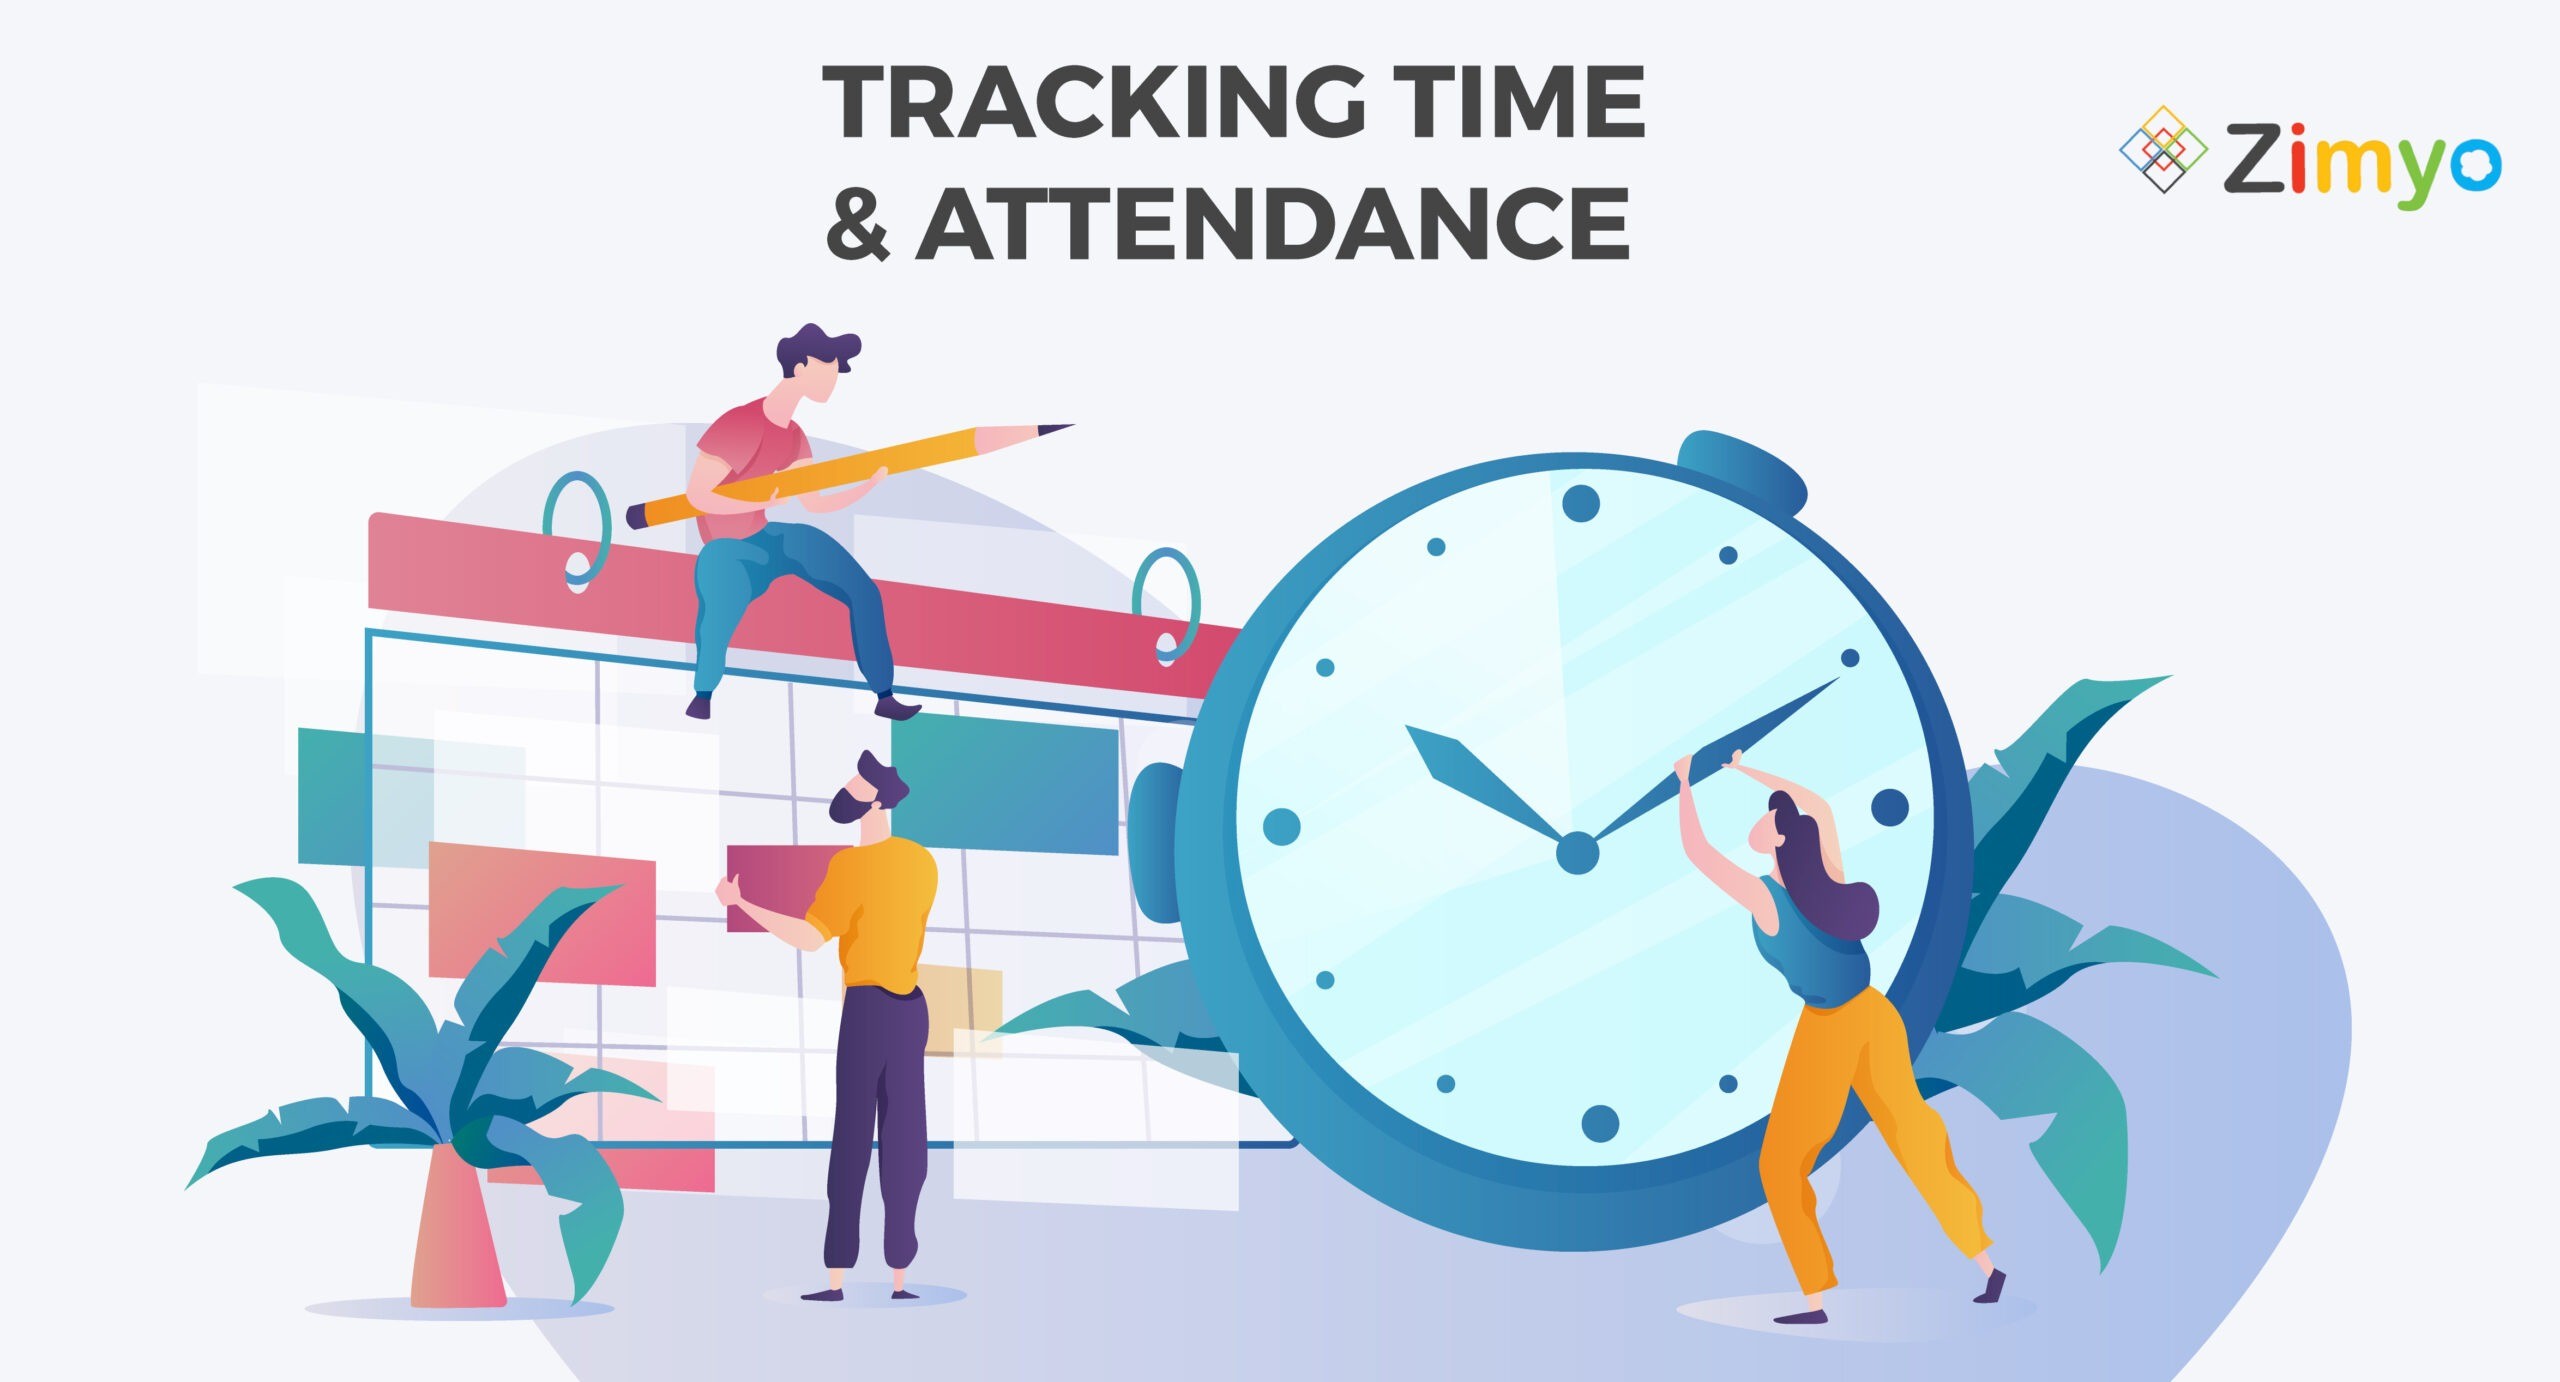 track time and attendance in an organization